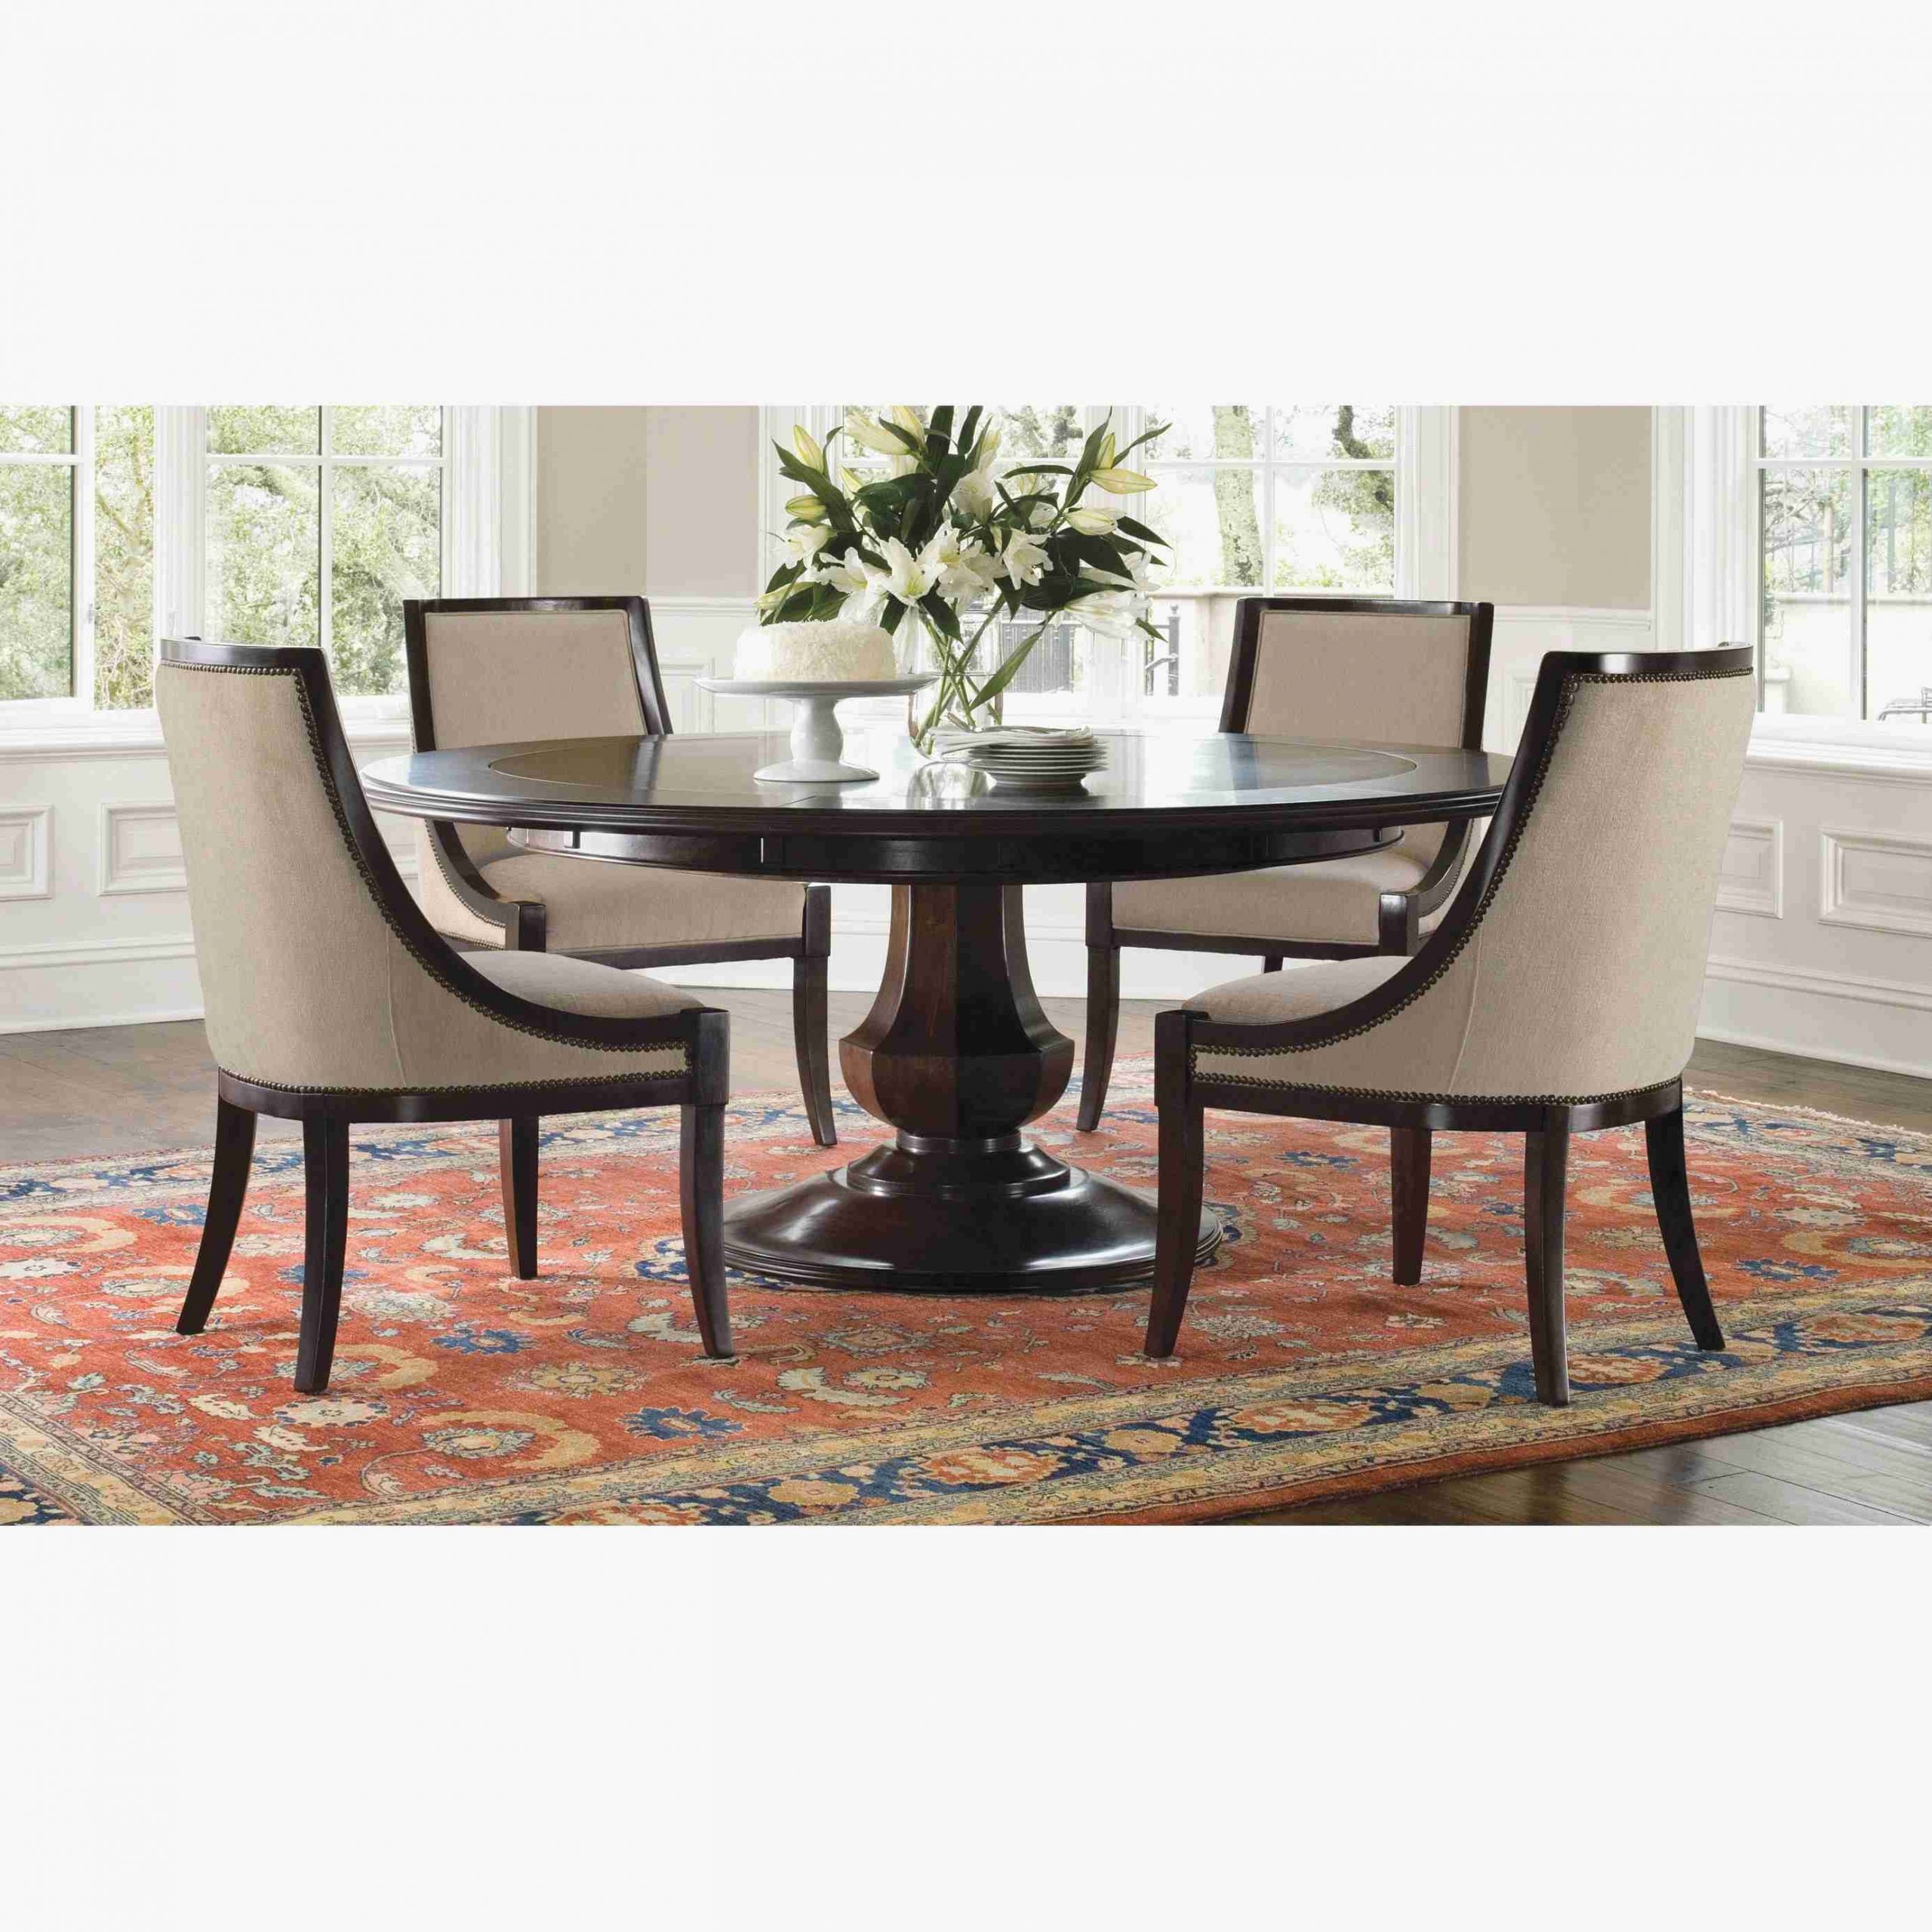 Dining Room Tables Jcpenney 2019 Home Design Regarding Dimensions 2772 X 2772 Scaled 